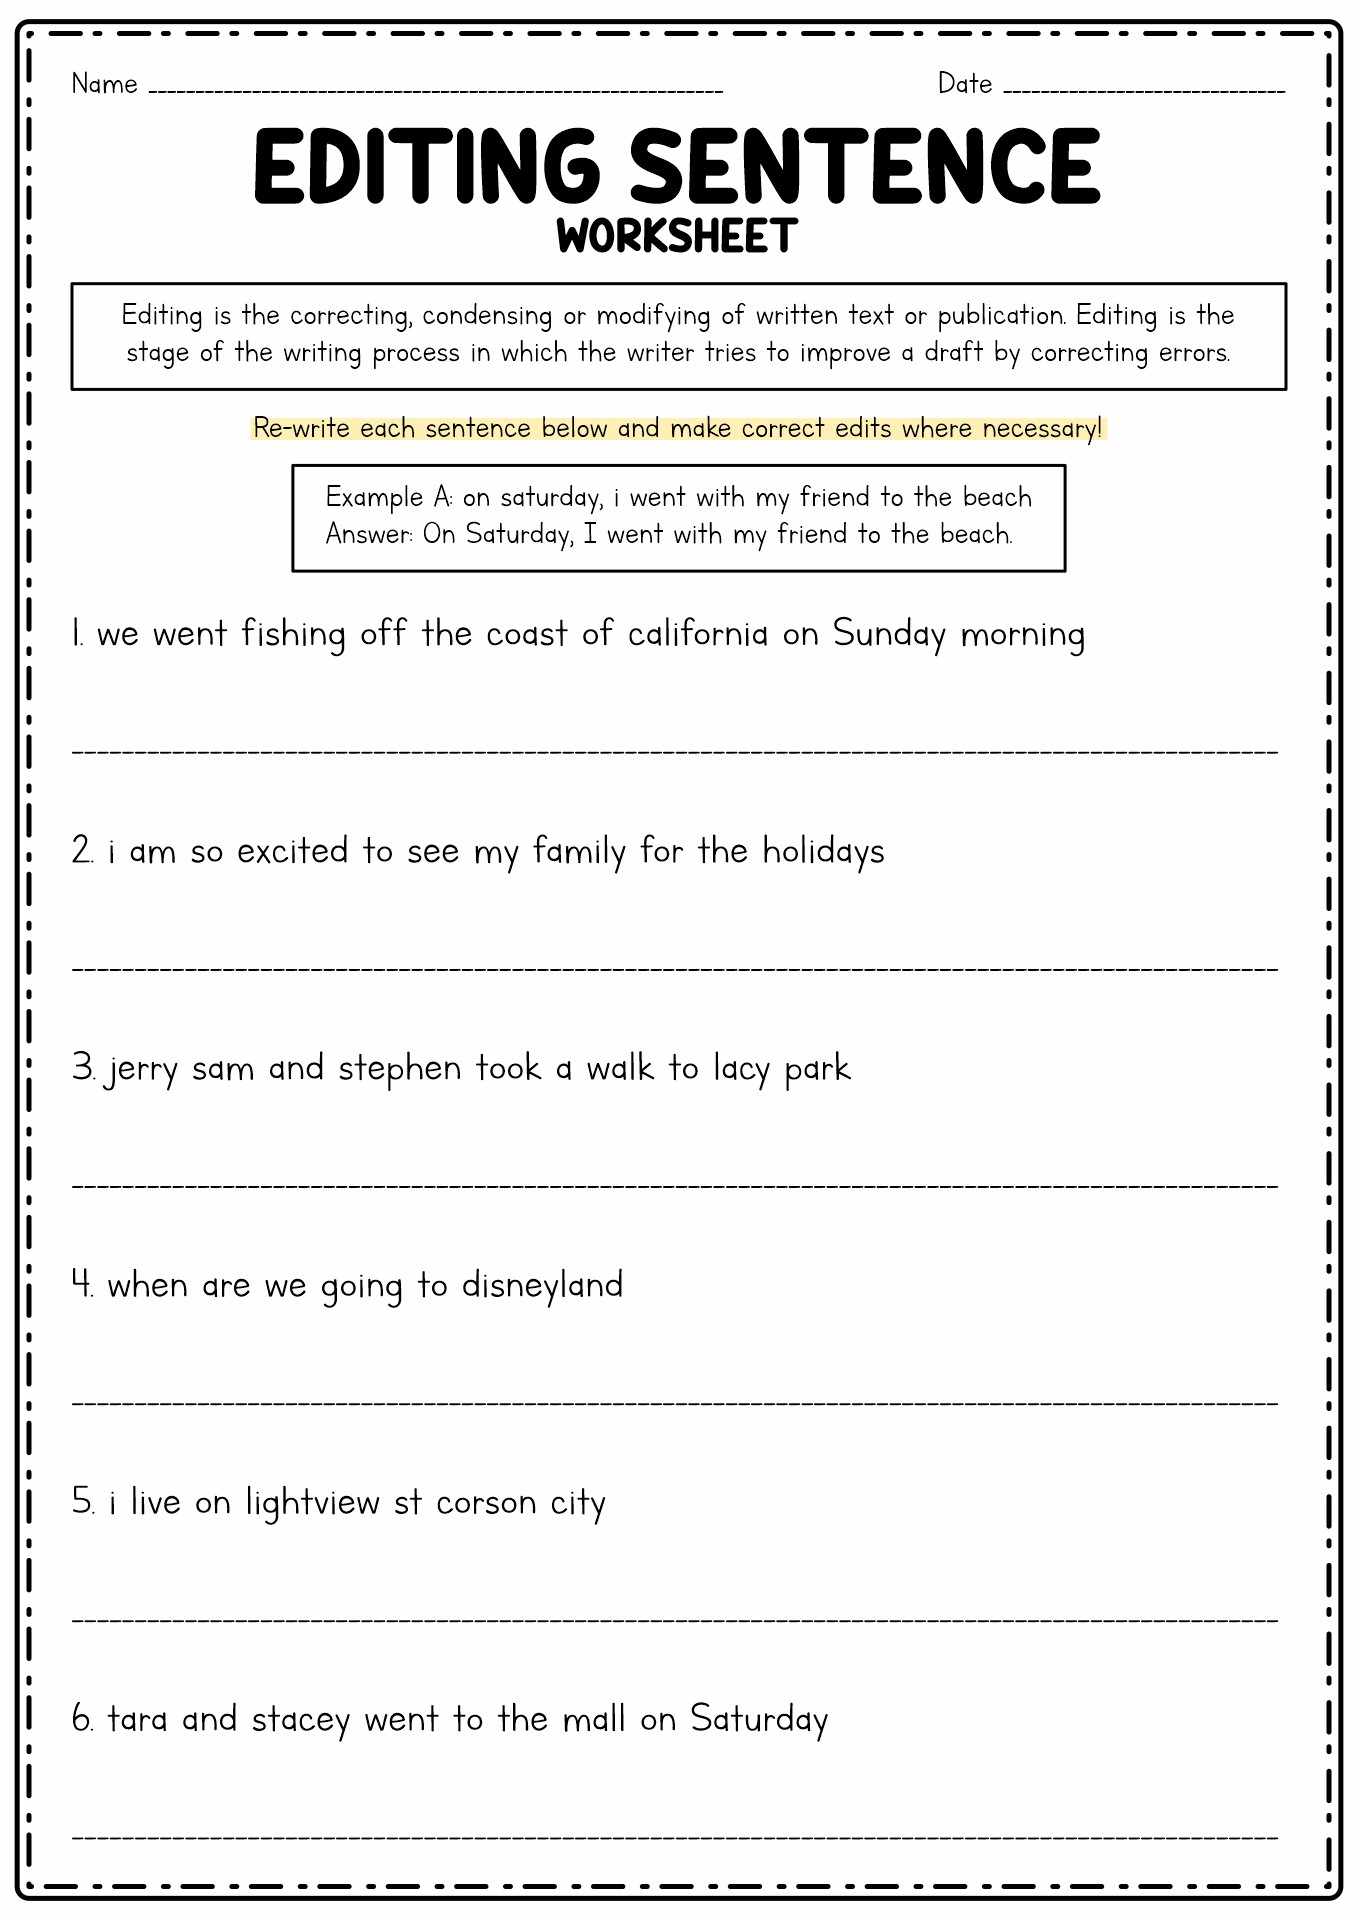 18 Best Images of 4th Grade Essay Writing Worksheets ...